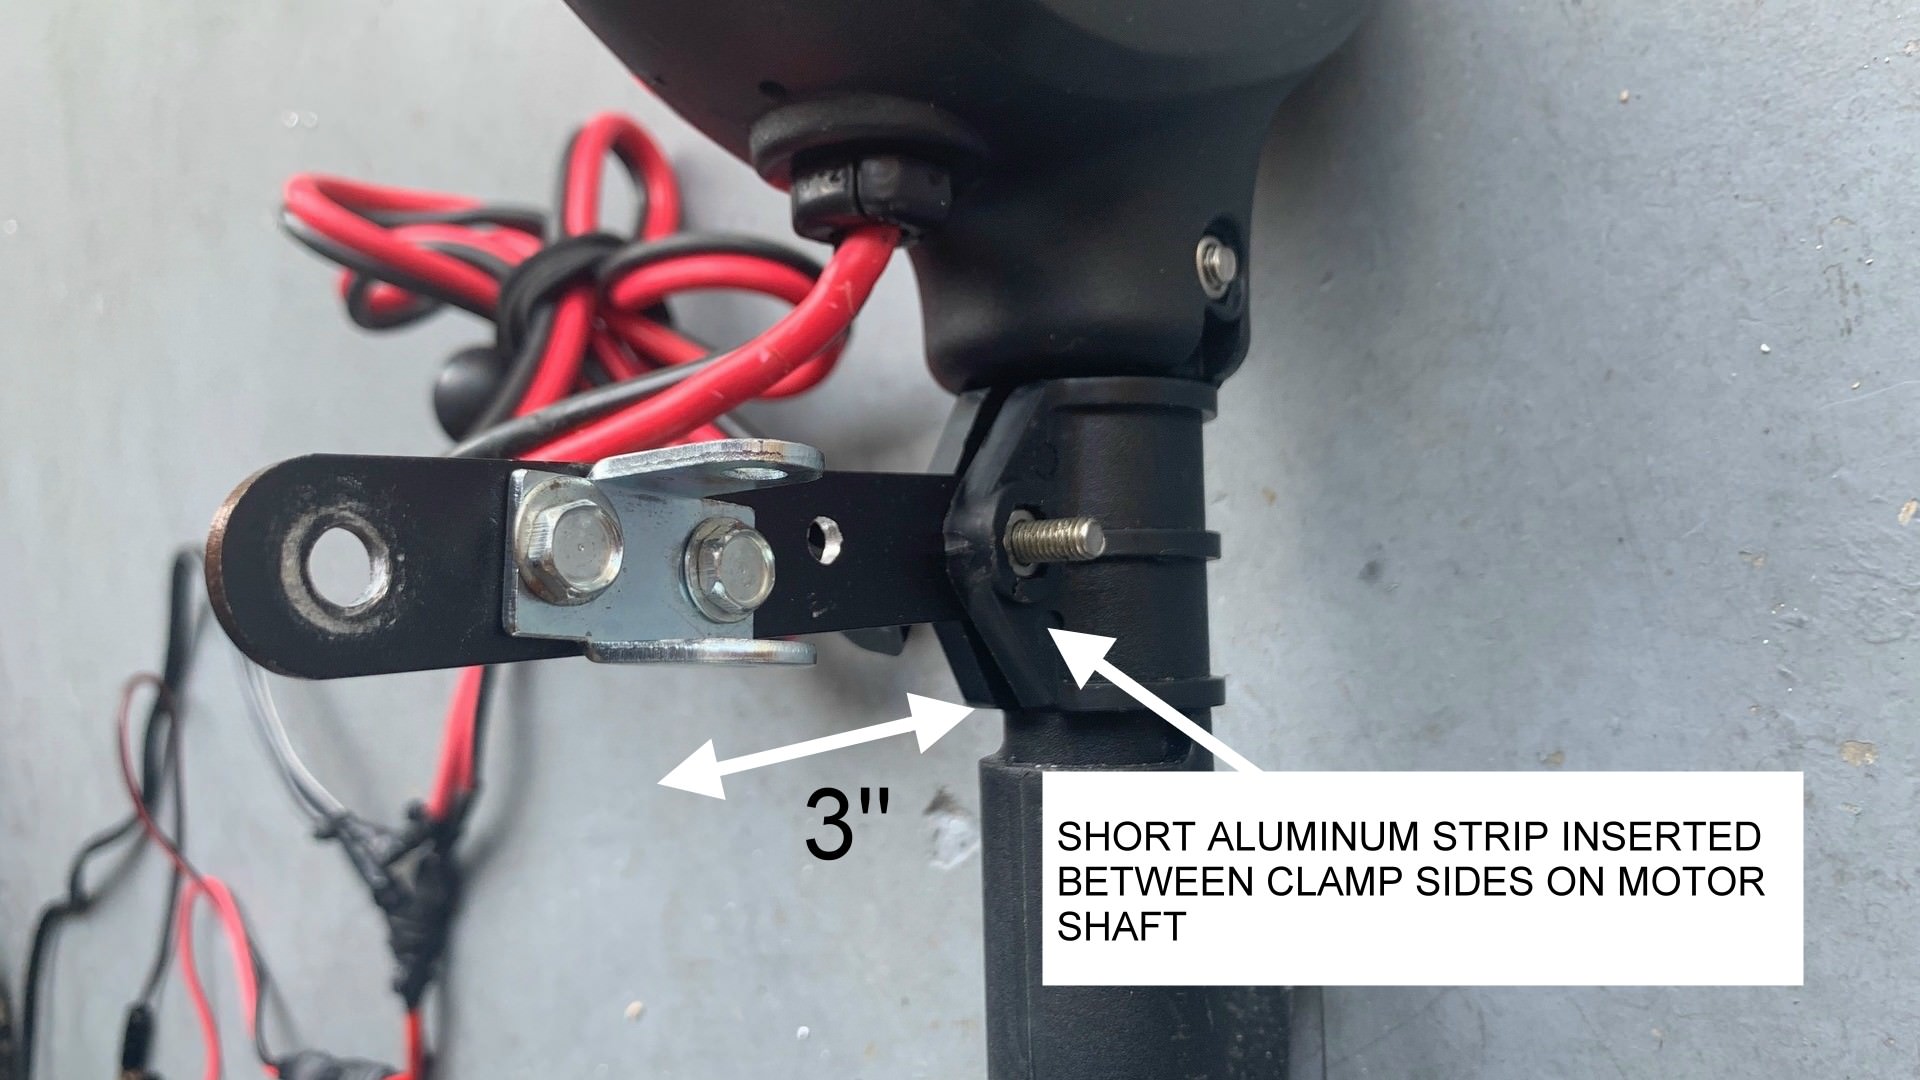 DIY instructions for remote steering for electric trolling motor using Linear Actuator.